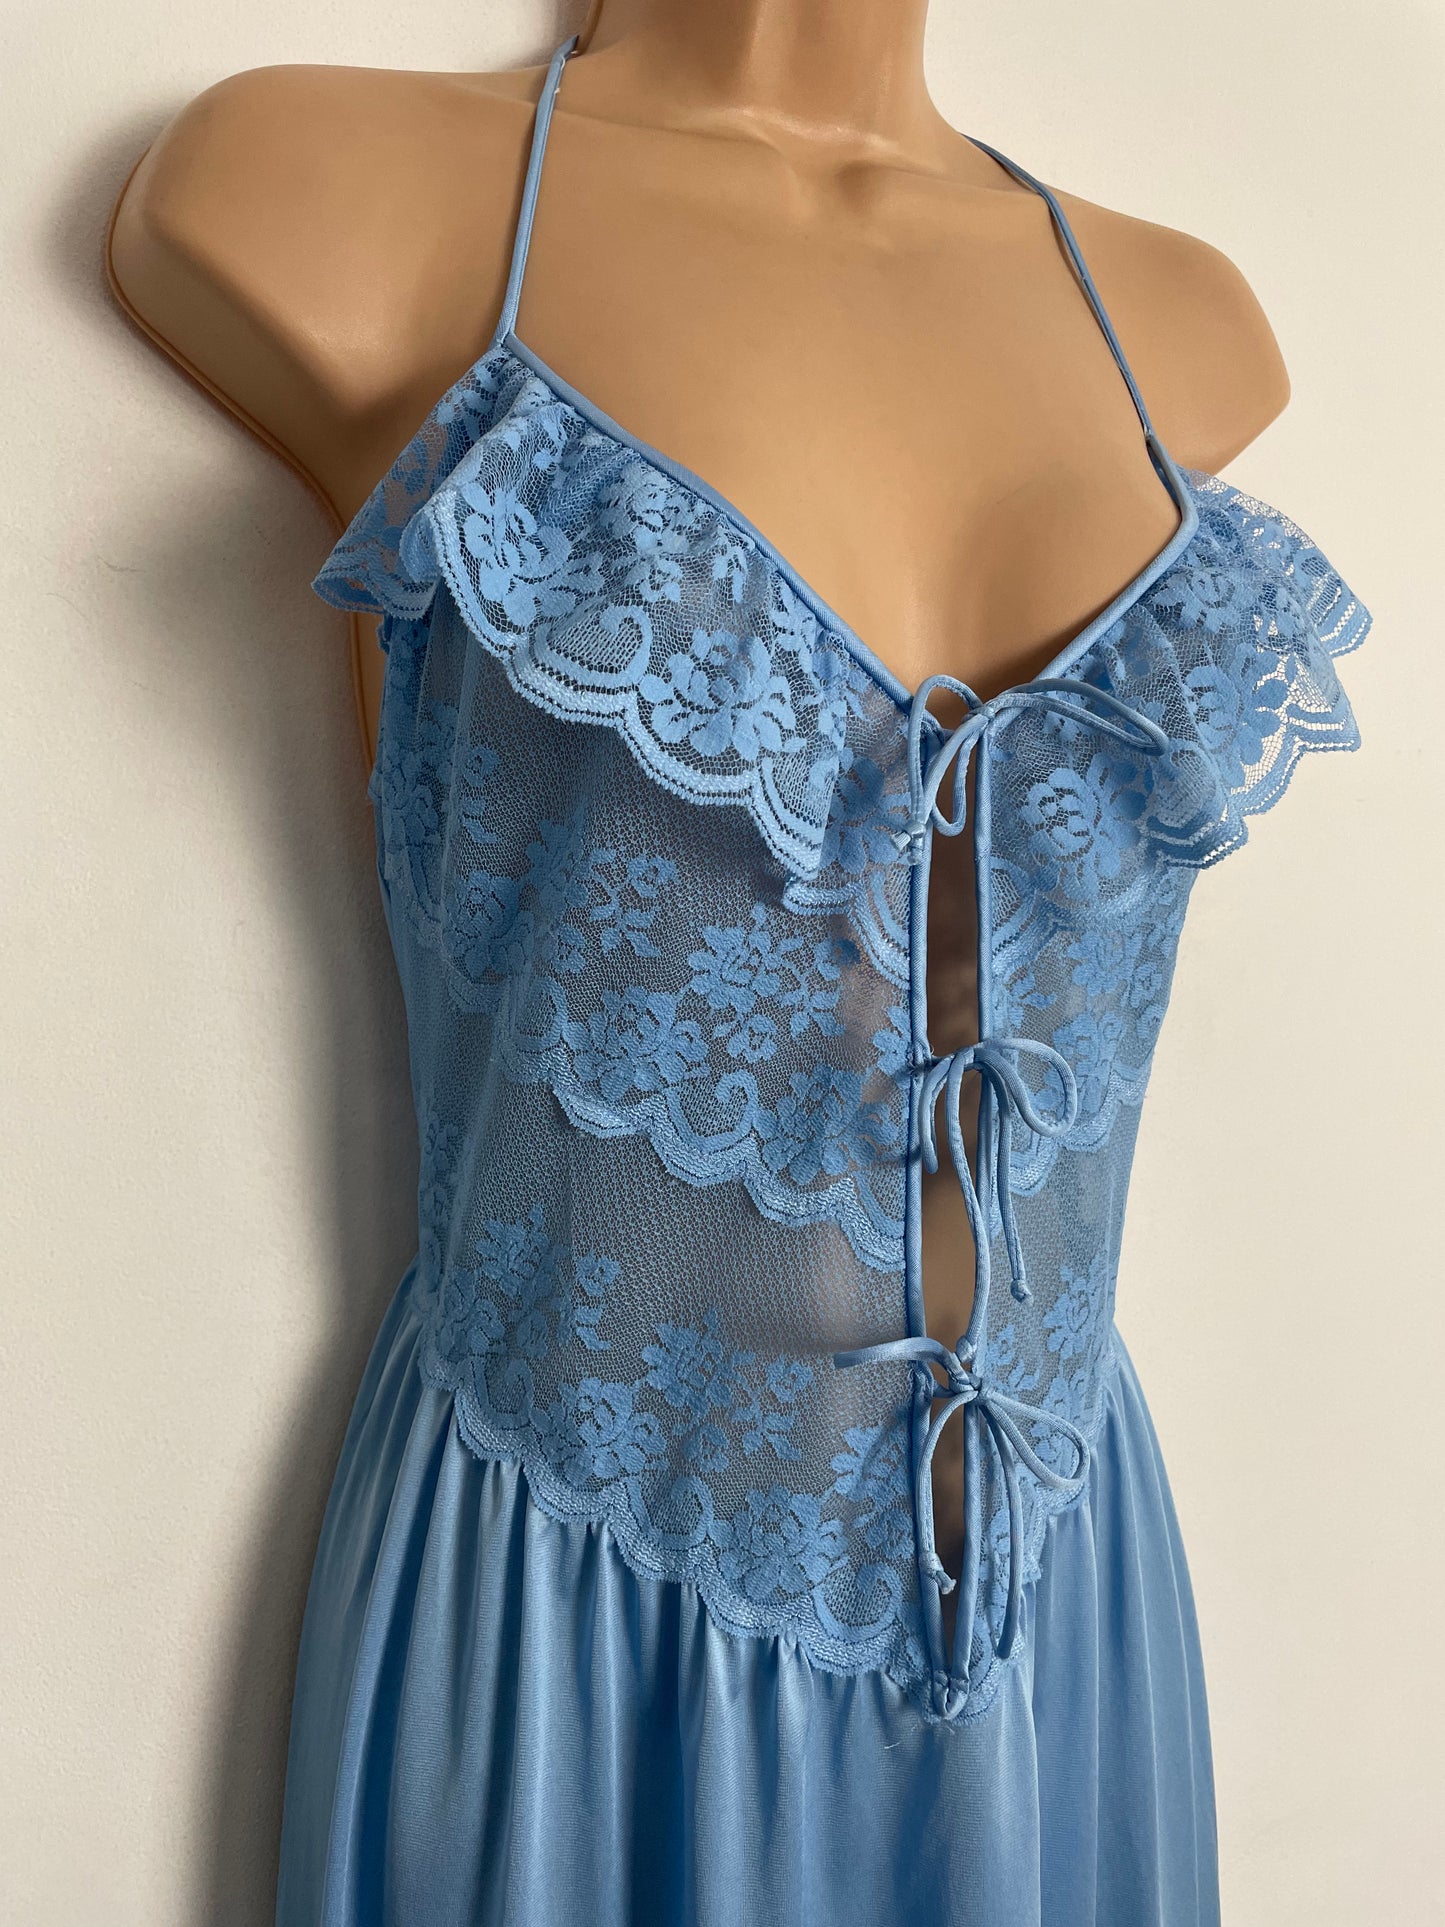 Vintage 1970s UK Size 12-14 Pretty Dusky Blue Lace Halter Strap Three Tie Fonted Negligee Nightgown